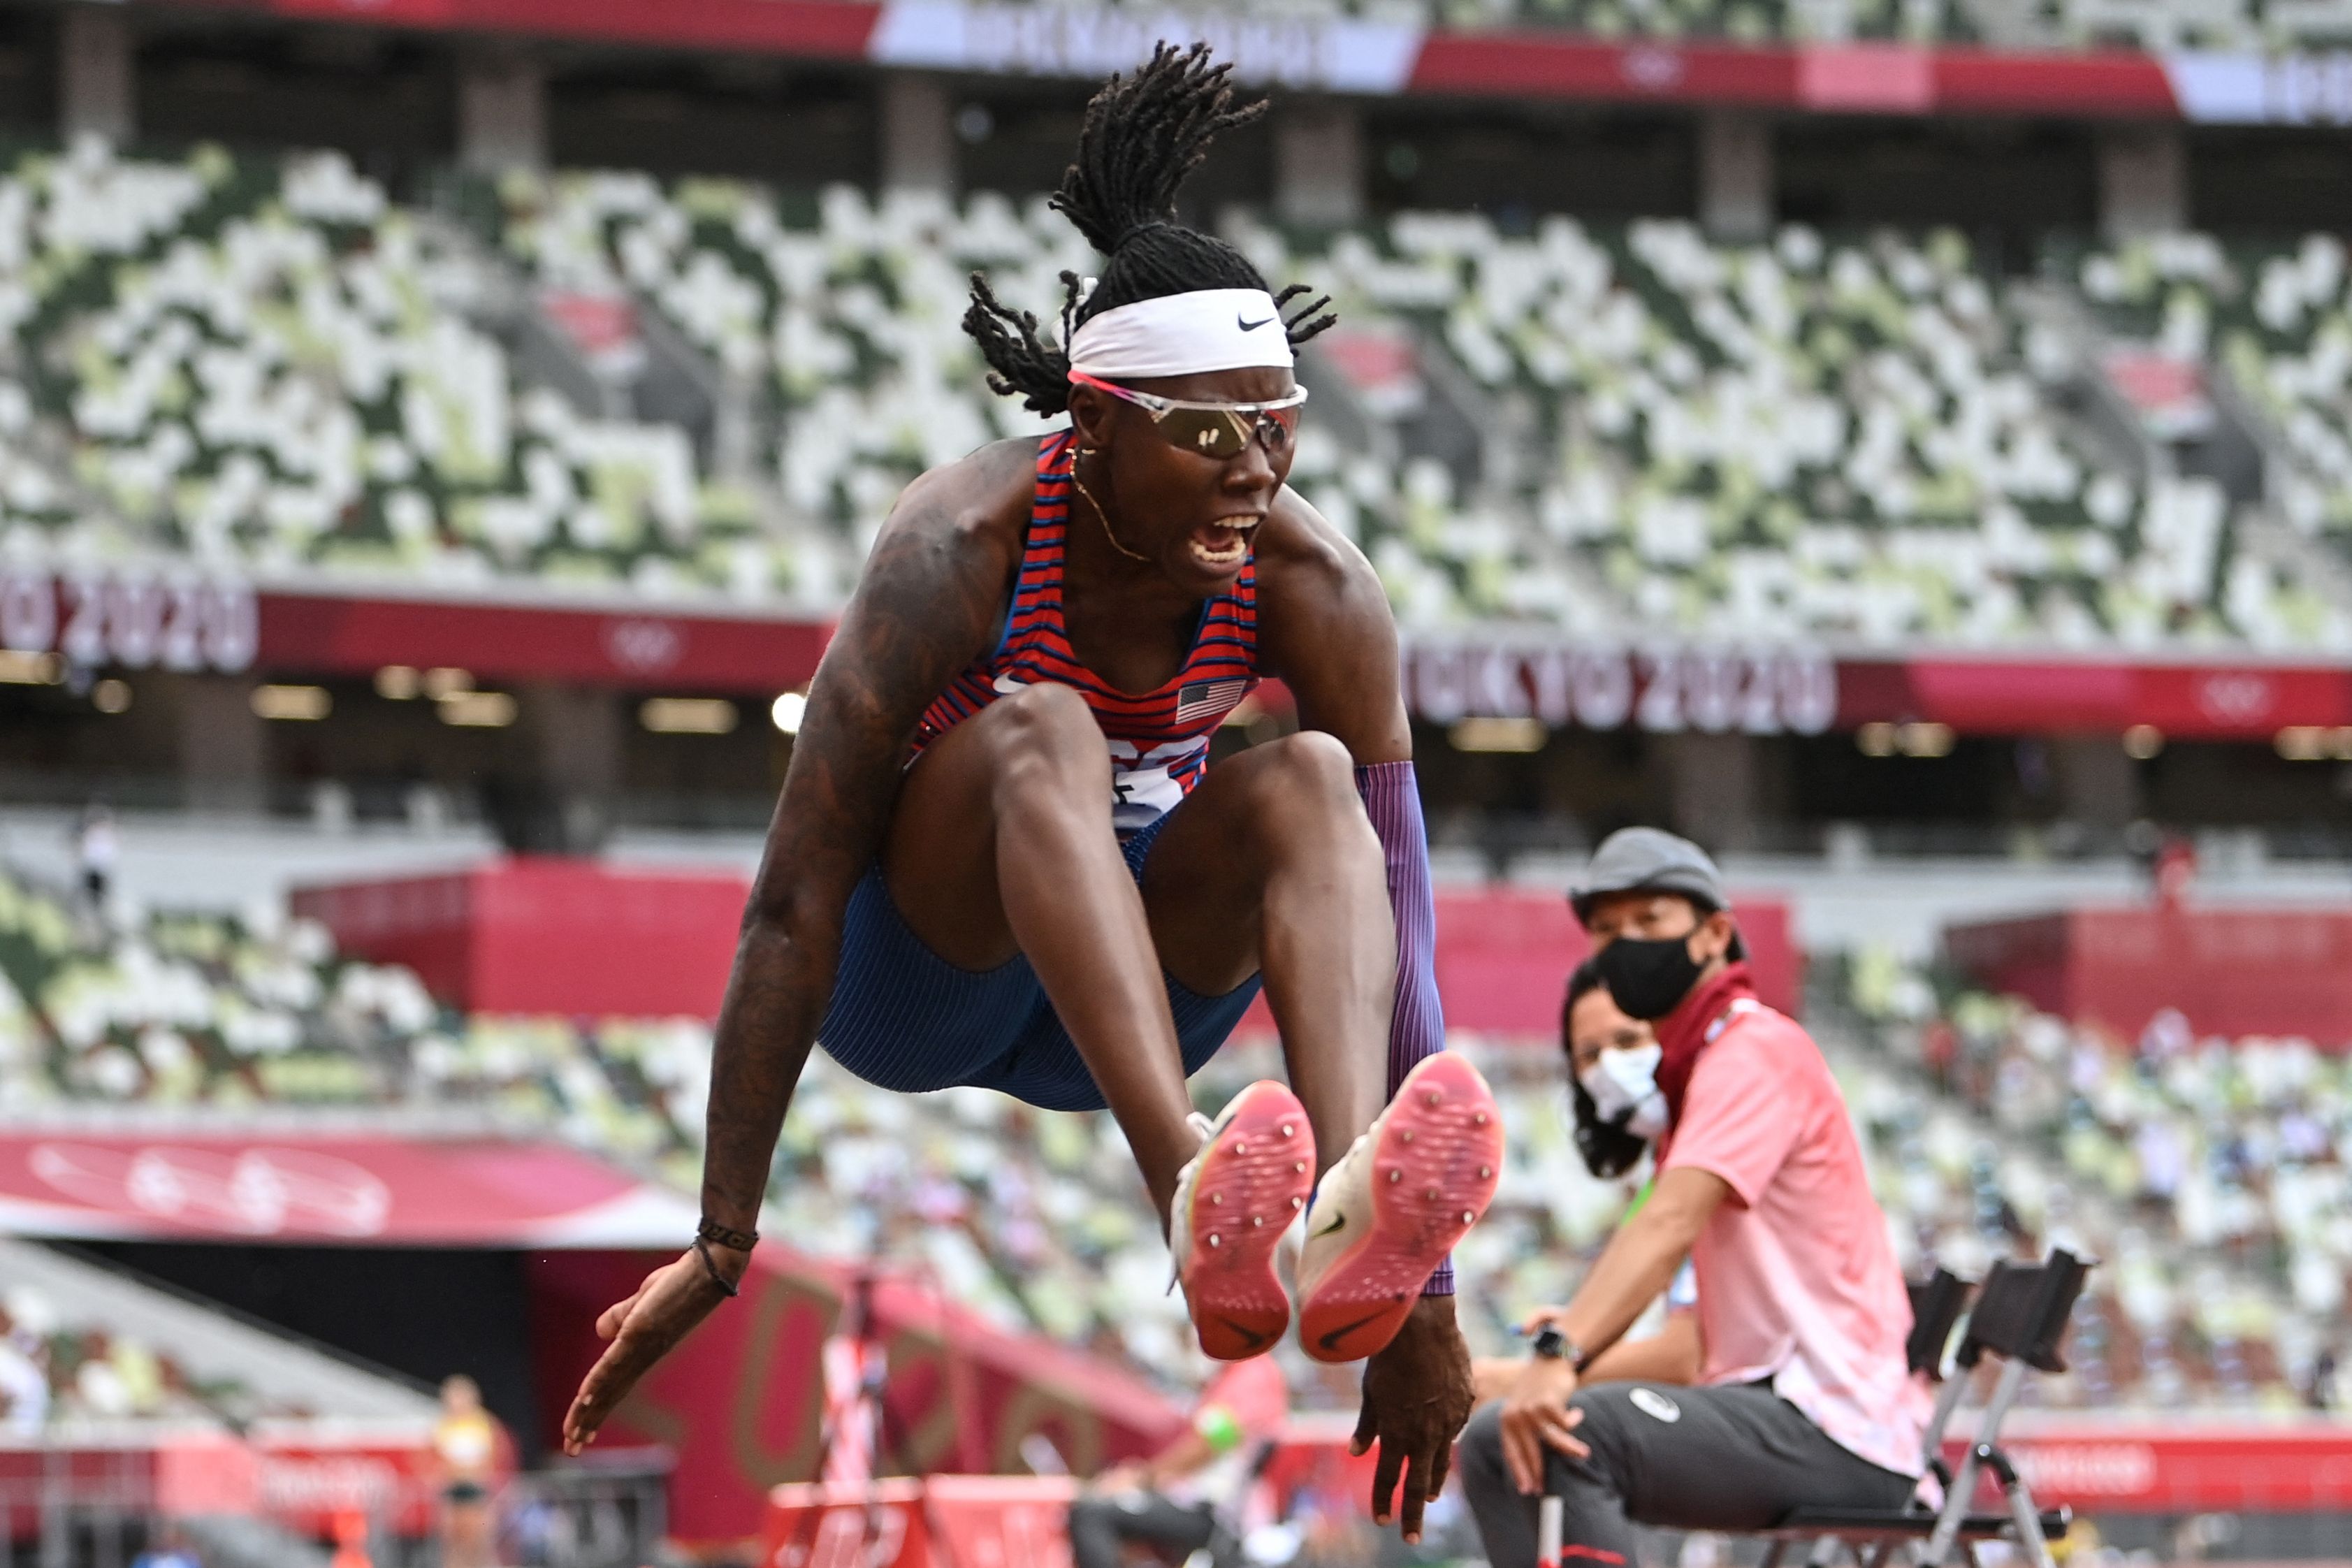  USA's Brittney Reese competes in the women's long jump final during the Tokyo 2020 Olympic Games at the Olympic Stadium in Tokyo on August 3